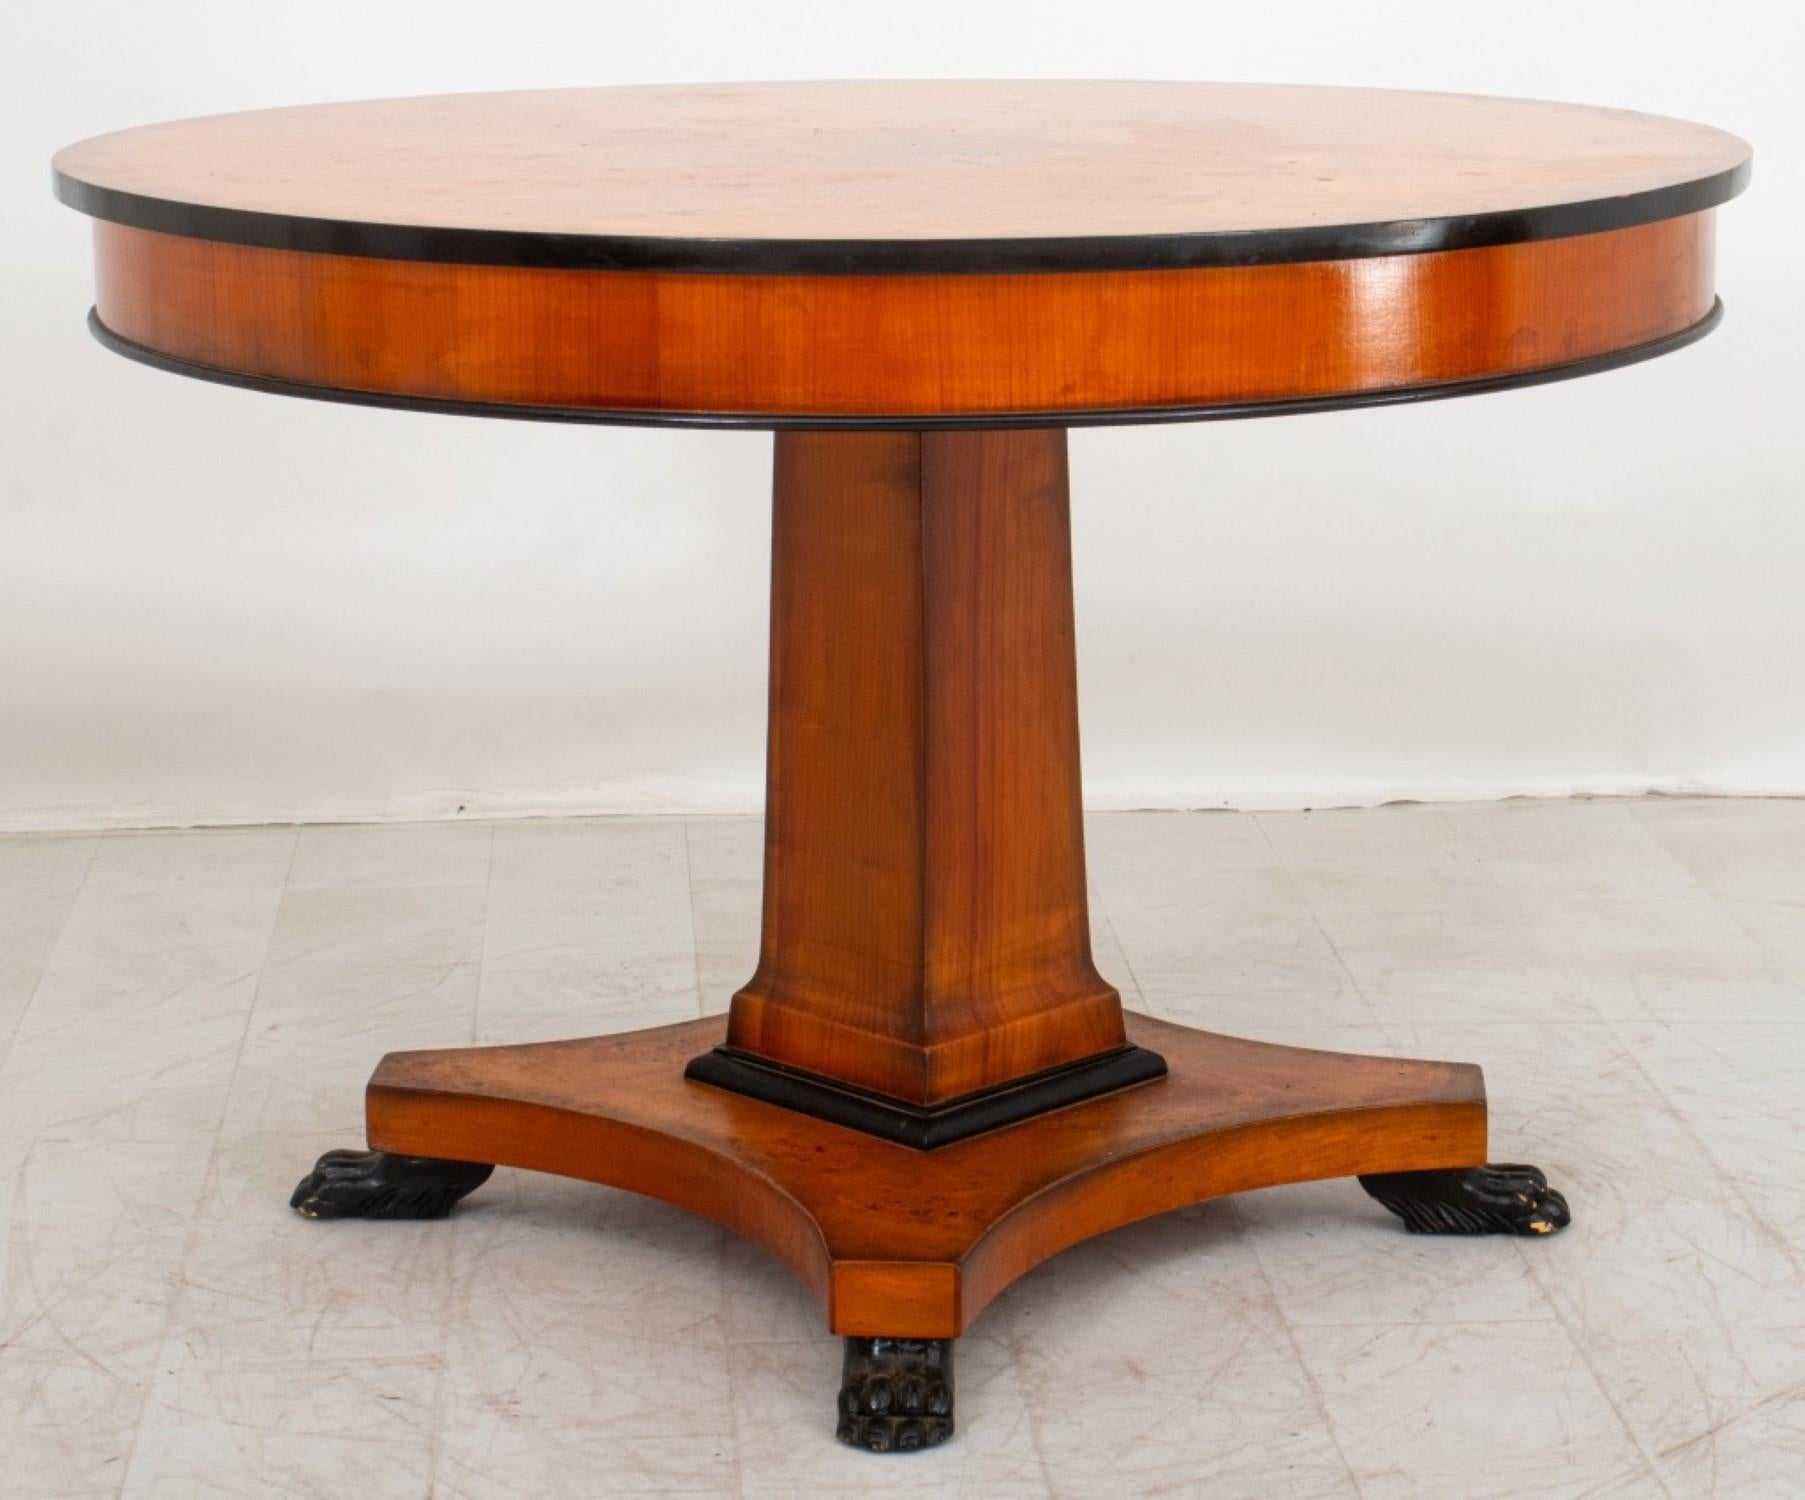 The Biedermeier Style Part Ebonized Burlwood Veneered Center Table has,

Dimensions of approximately 29.75 inches in height and 44.25 inches in diameter. This piece reflects characteristics of Neoclassical Style and Biedermeier design, showcasing